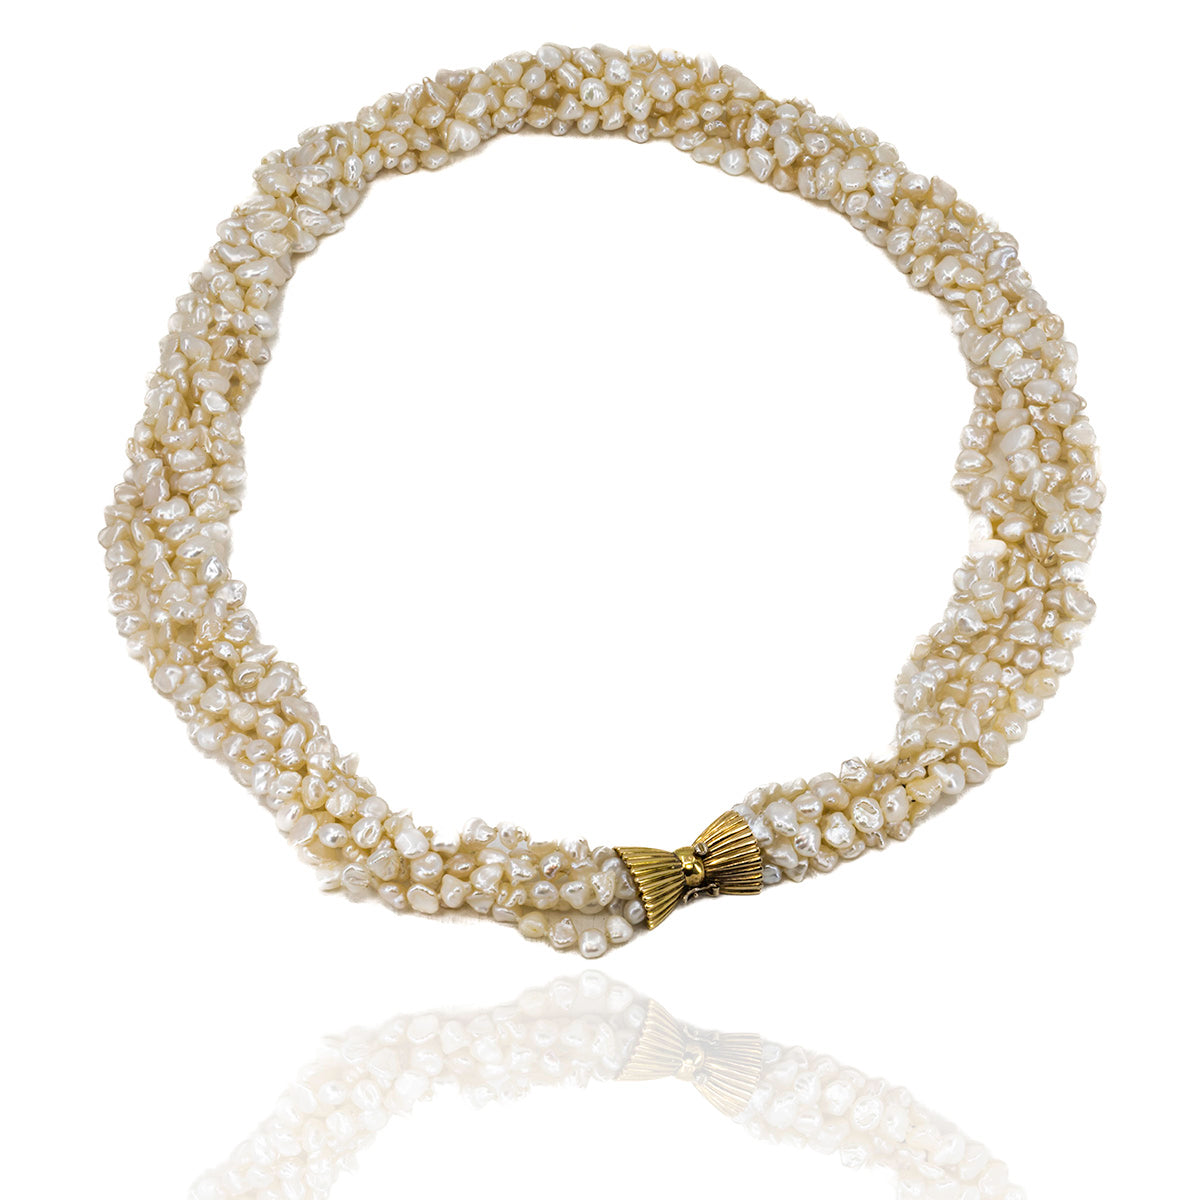 Kashi Pearl Necklace